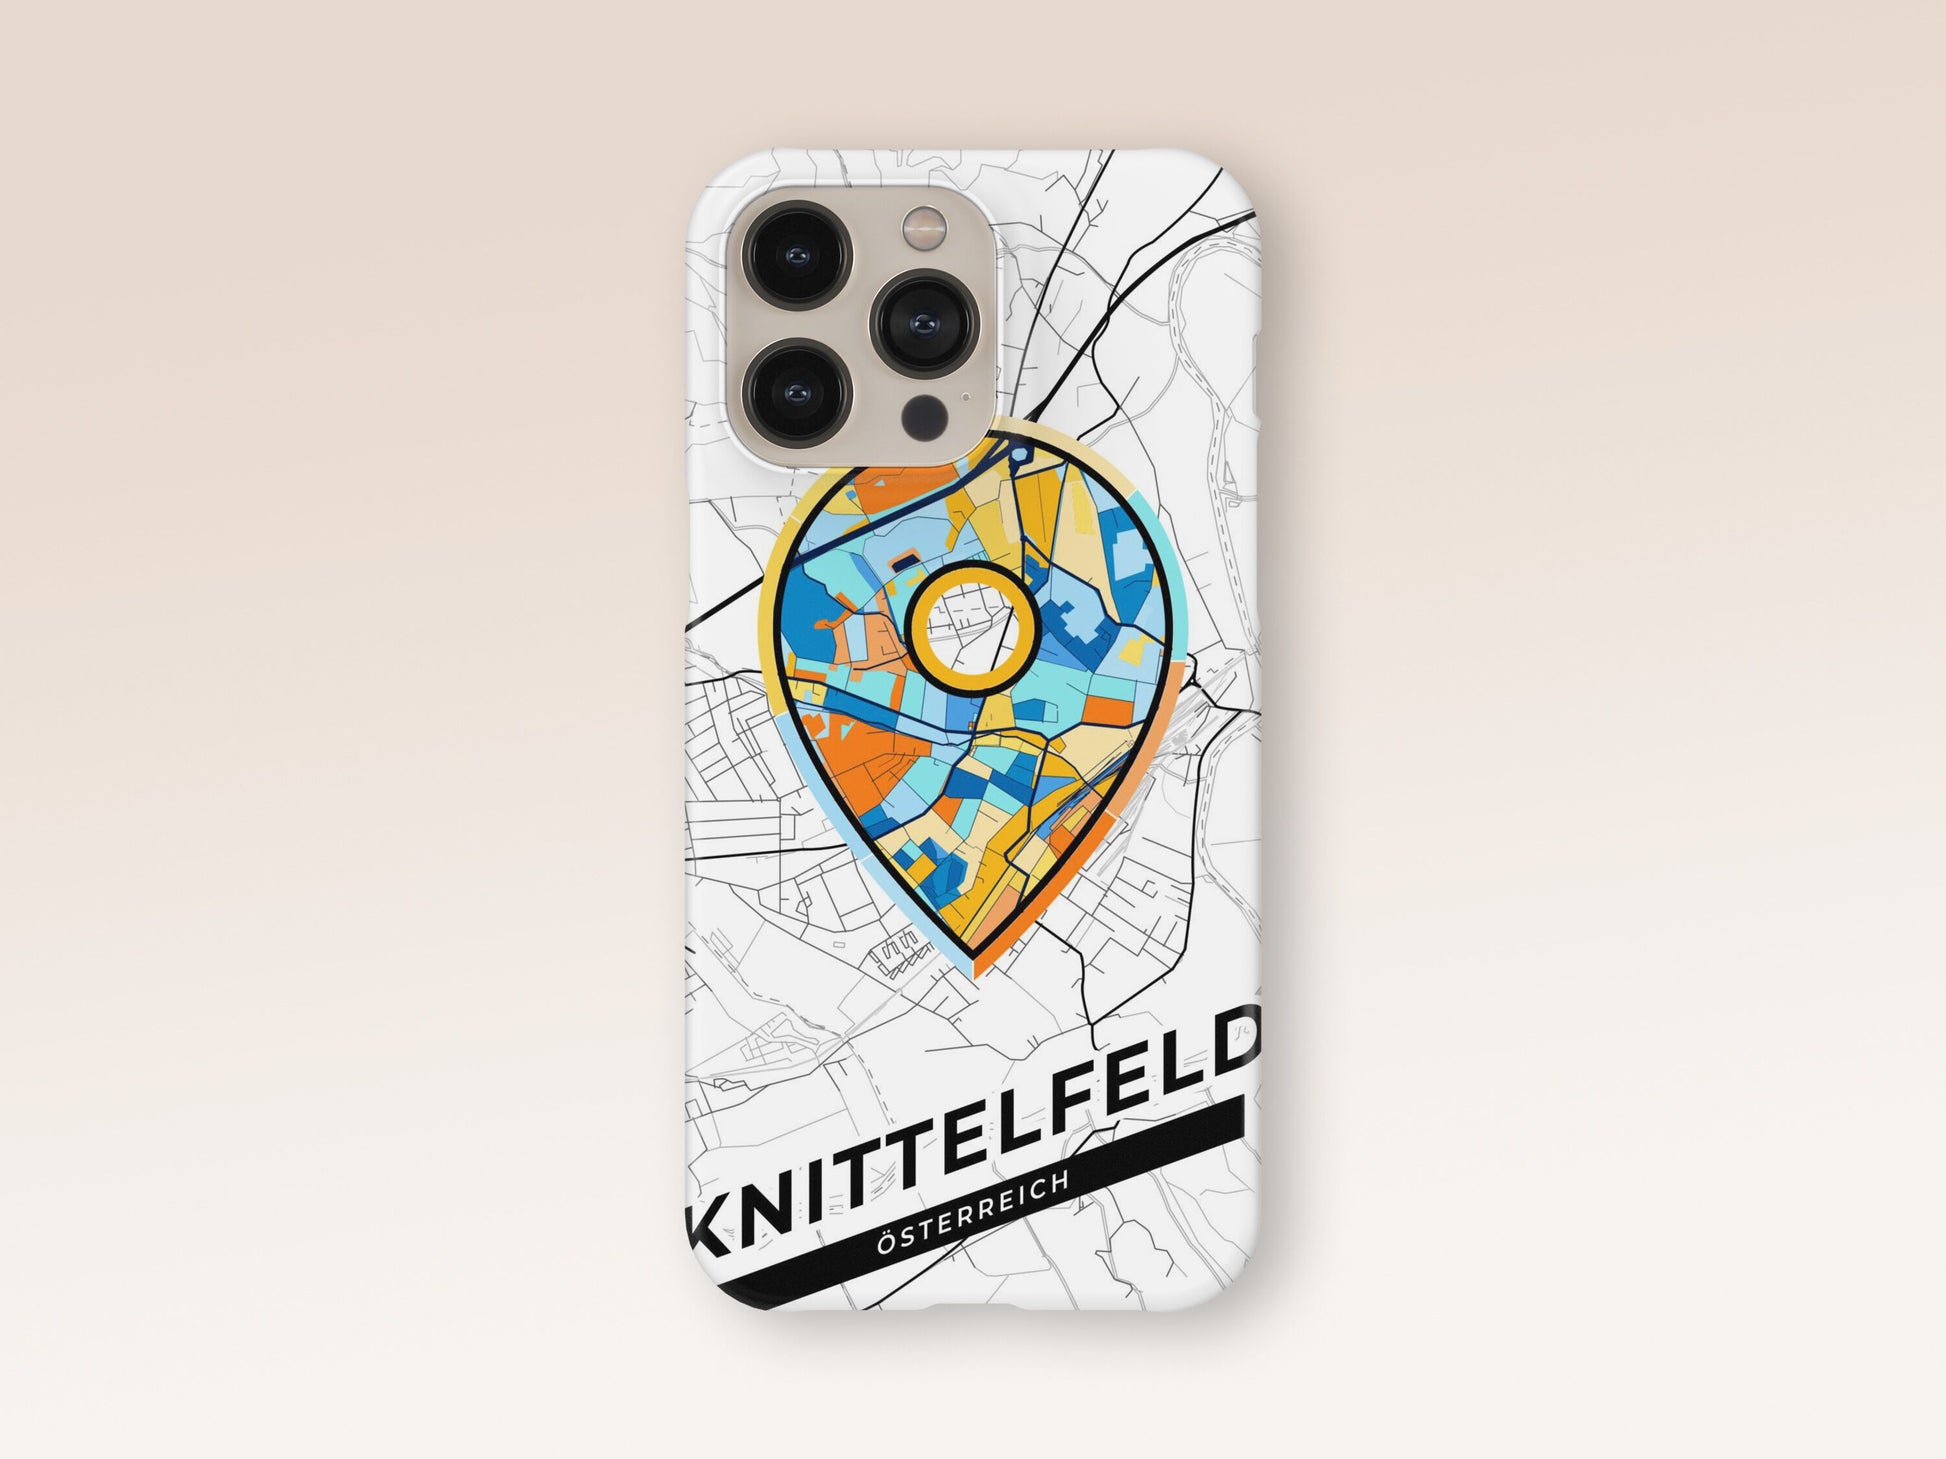 Knittelfeld Österreich slim phone case with colorful icon. Birthday, wedding or housewarming gift. Couple match cases. 1